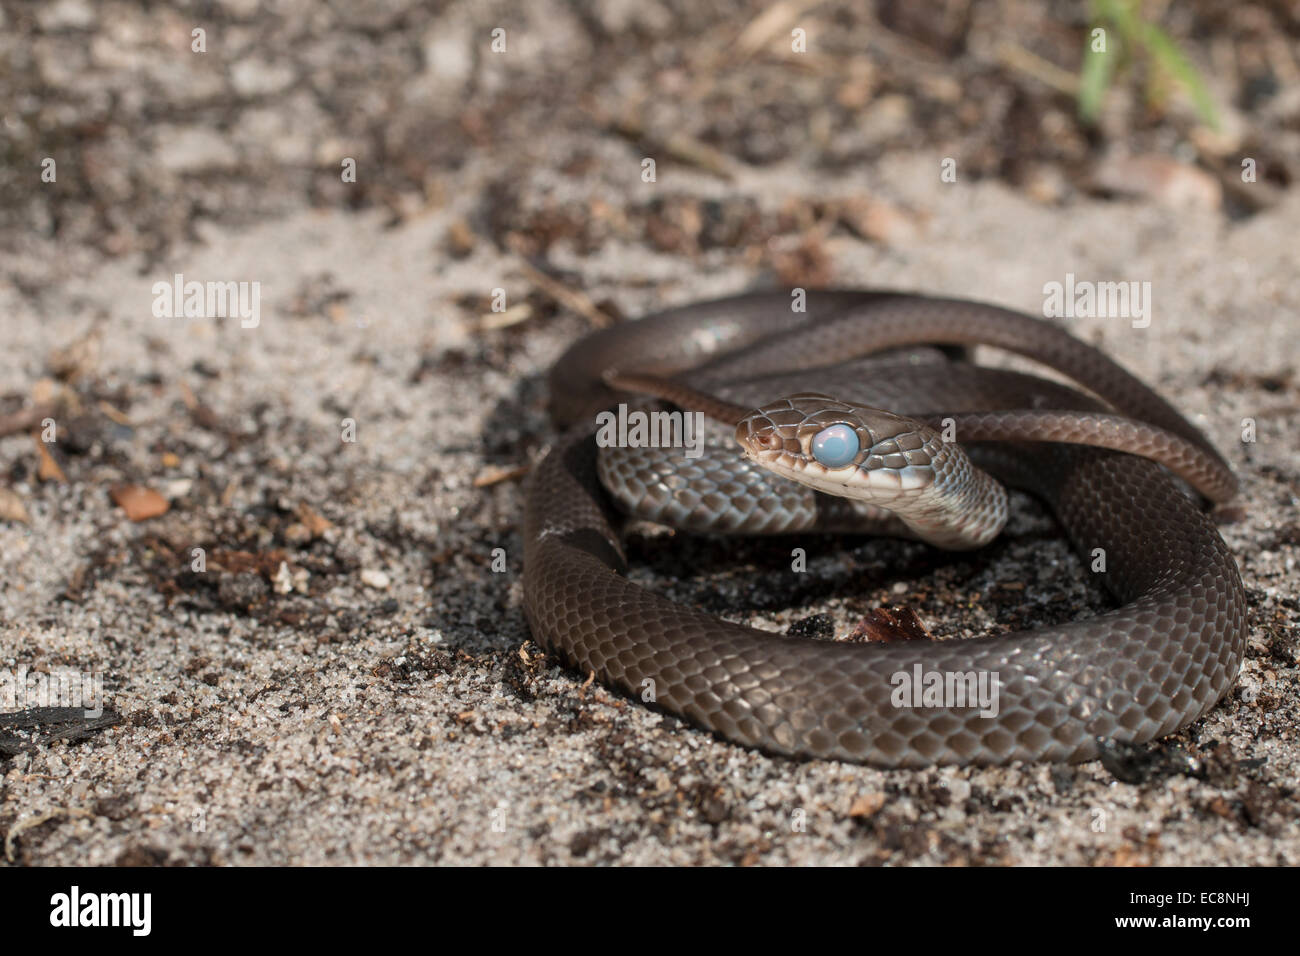 Southern black racer near shedding - Coluber constrictor priapus Stock Photo